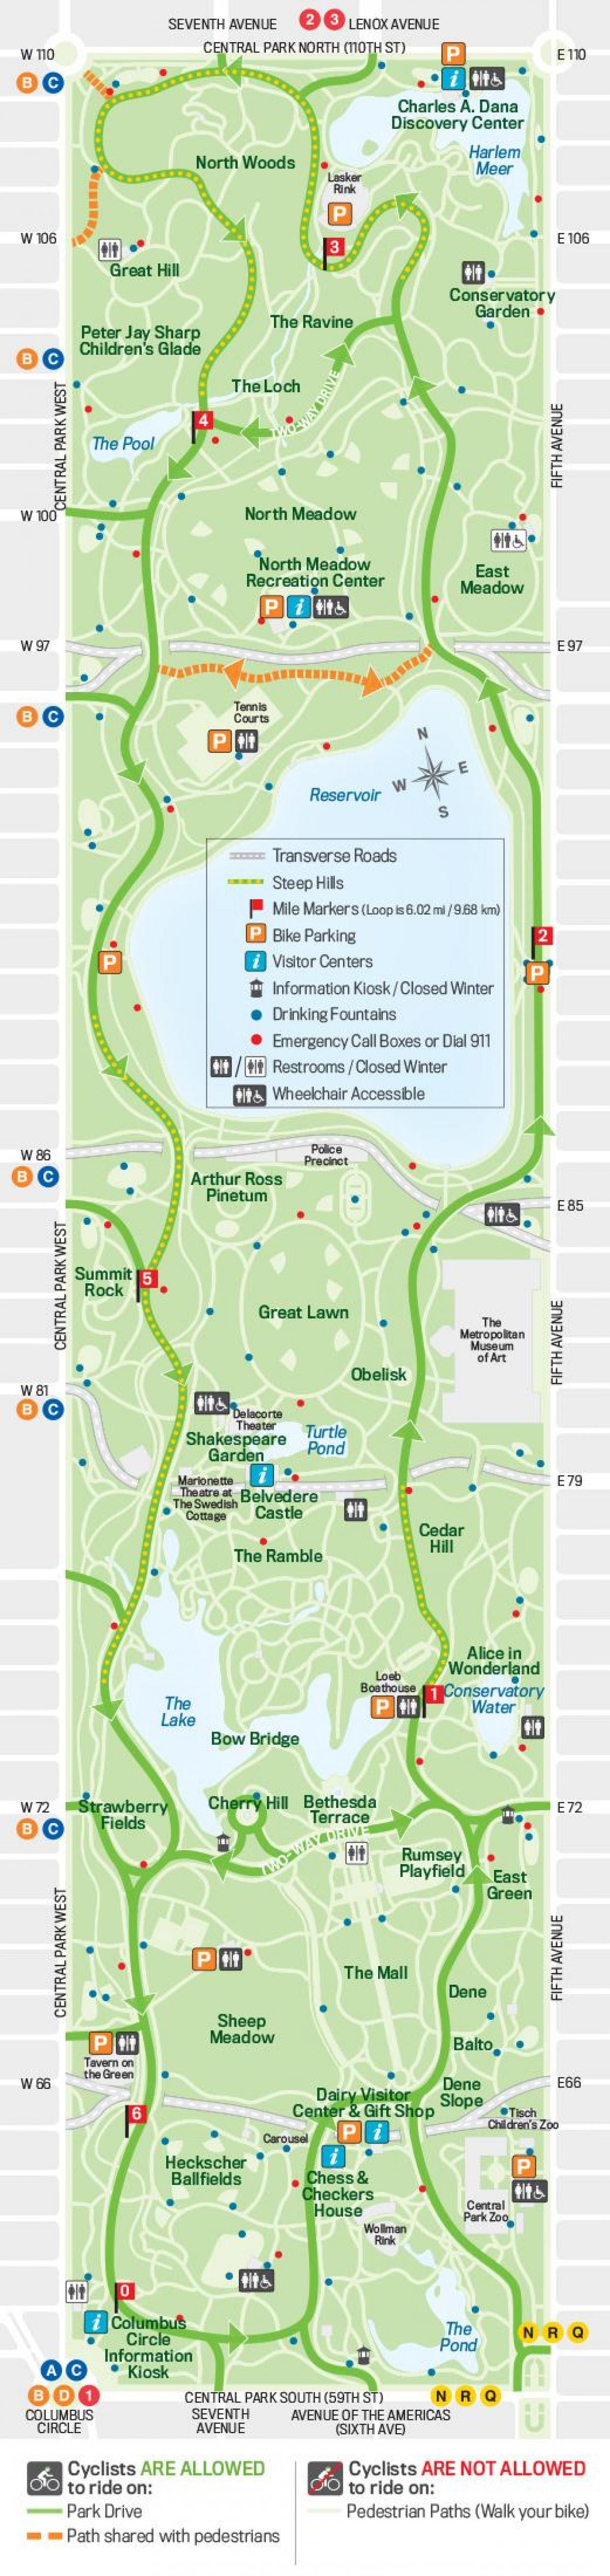 map of central park running